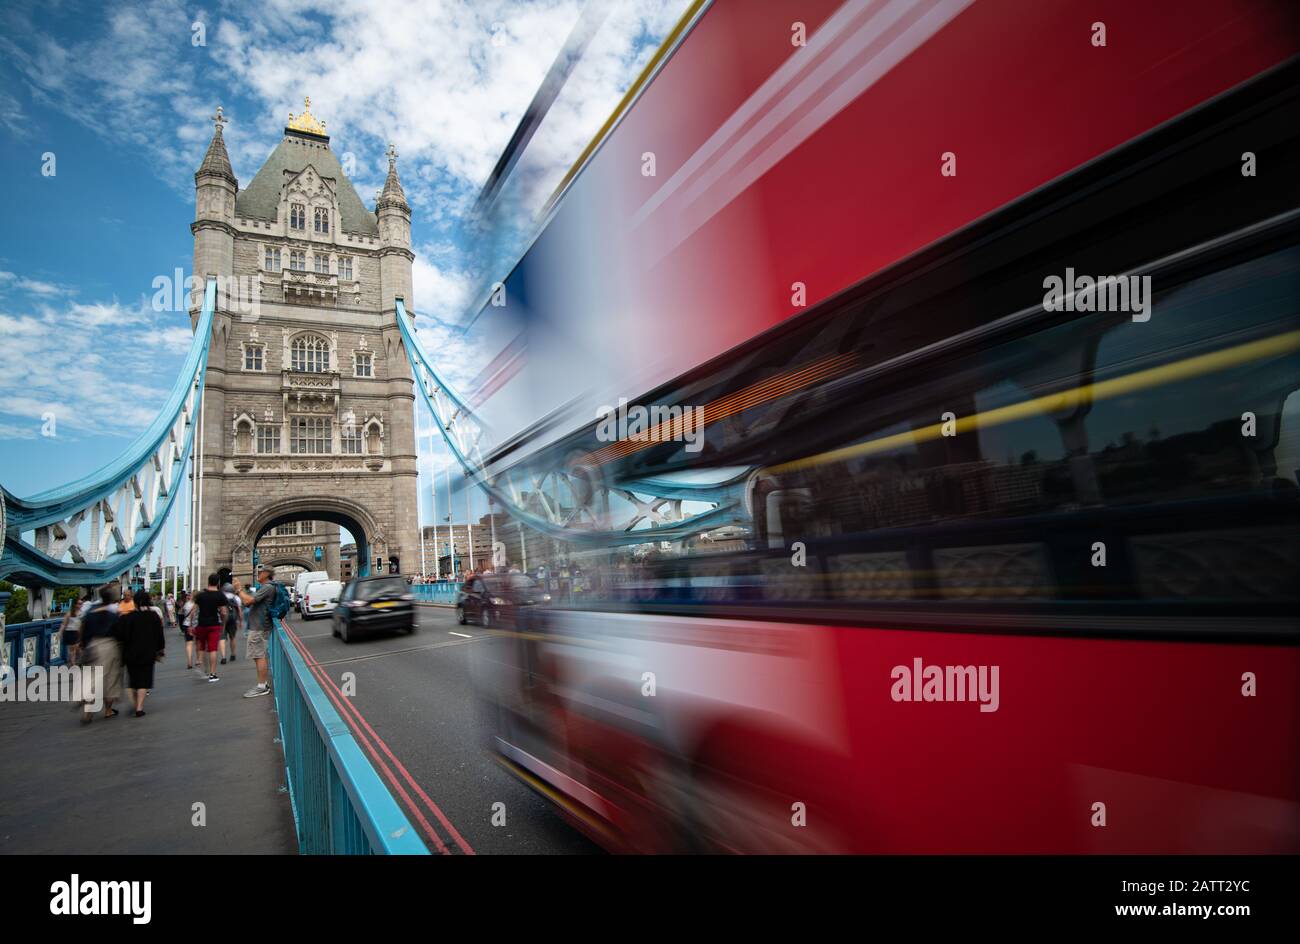 People walking and red traditional London bus crossing the famous London Tower bridge Stock Photo